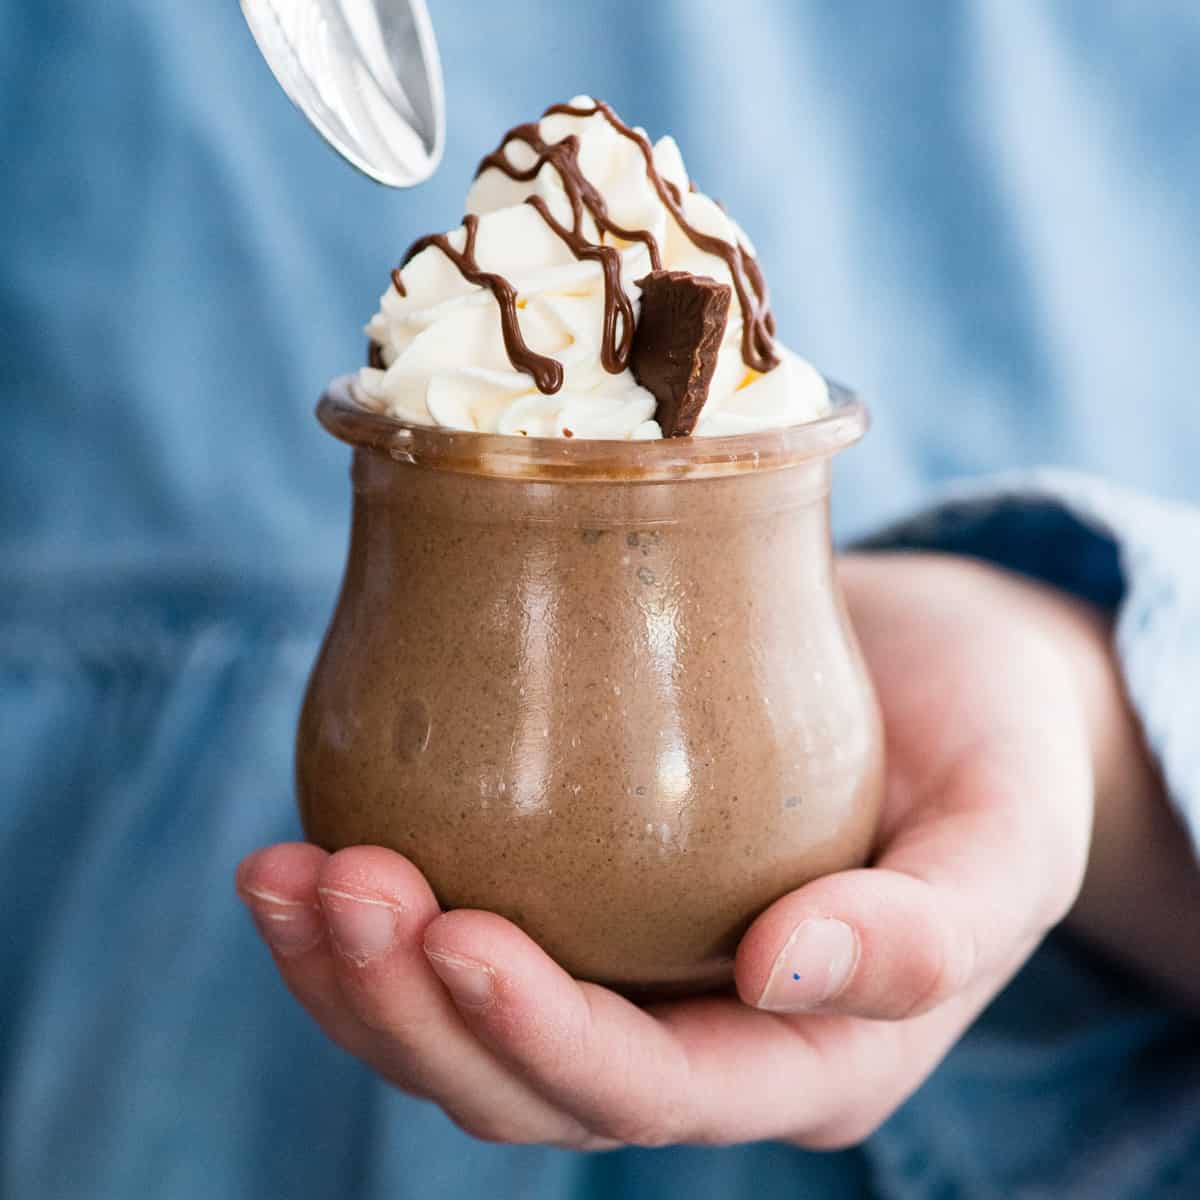 Front view of a hand holding a jar of Creamy Chocolate Peanut Butter Chia Pudding while the other hand is holding a spoon above it ready to dig in 